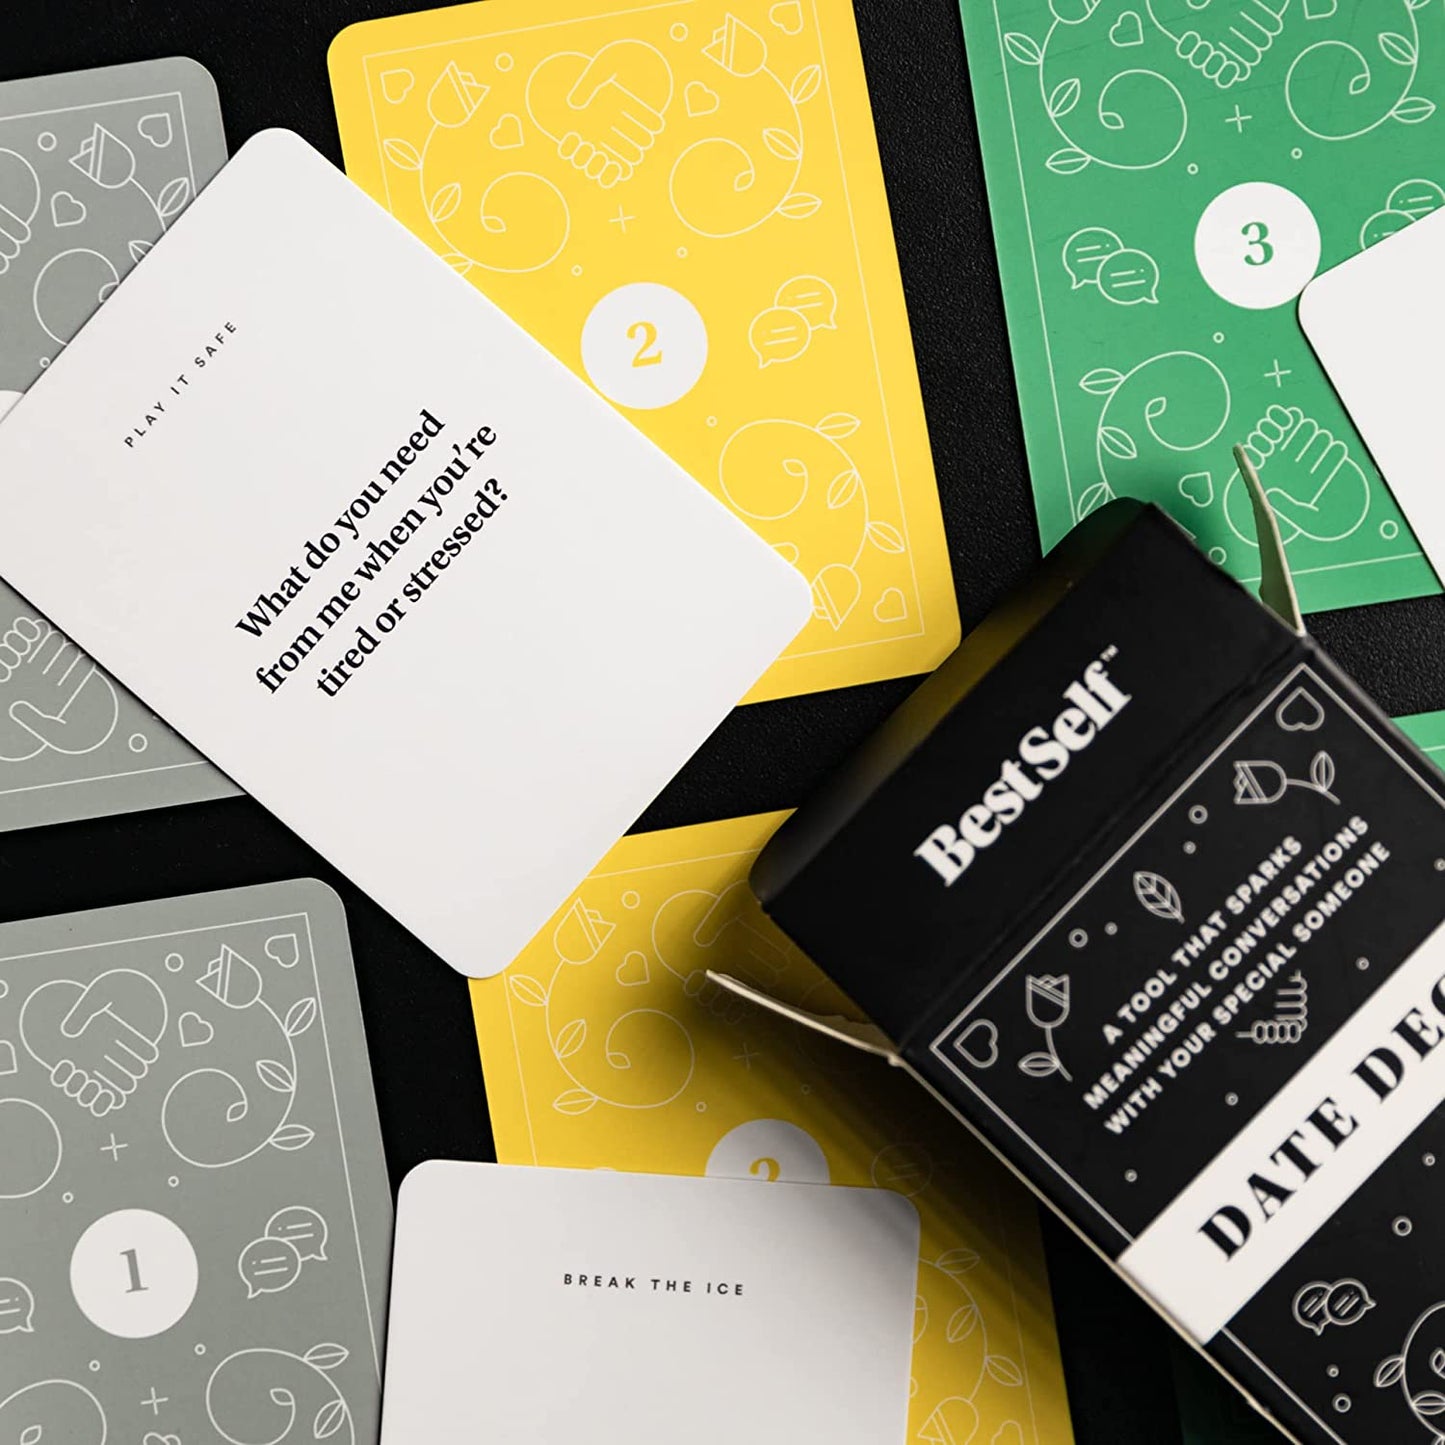 Date Deck by BestSelf — Exciting, Engaging, and Though-Provoking Conversation Prompts Perfect for Unlocking Connection, Companionship and Meaningful Discussion — 50 Cards